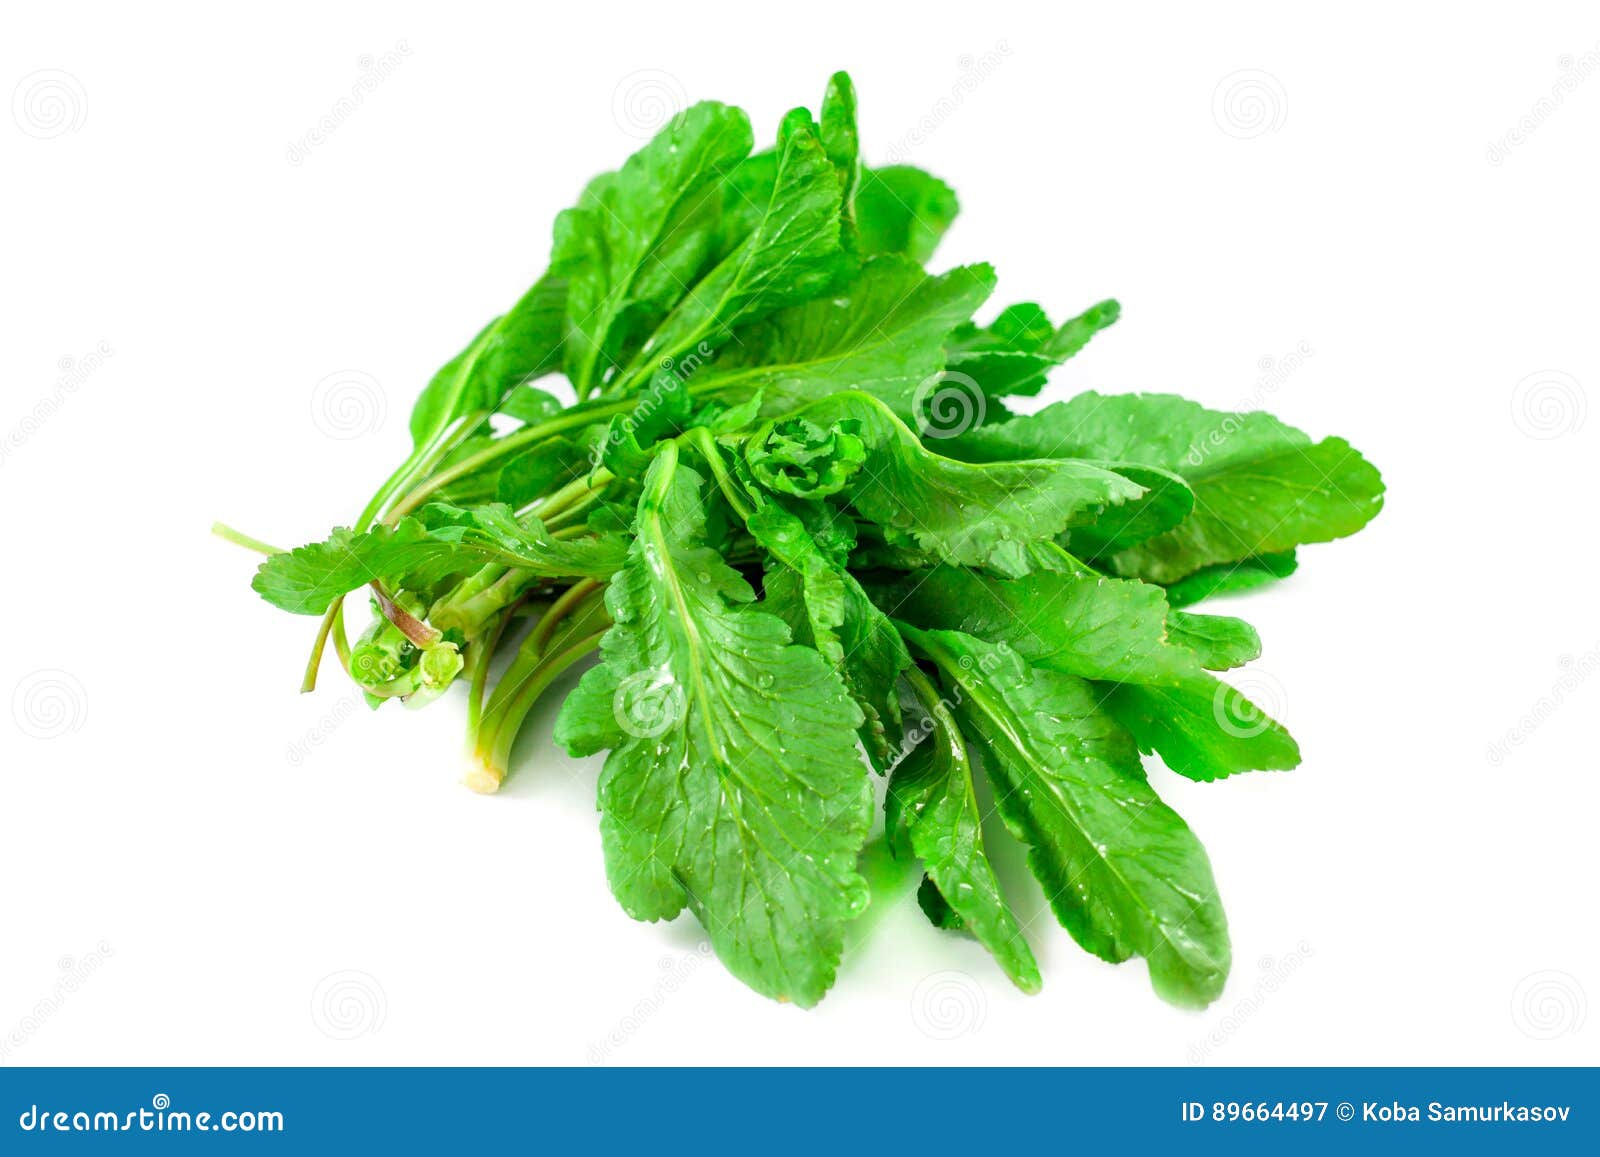 bunch of spinach  on white background